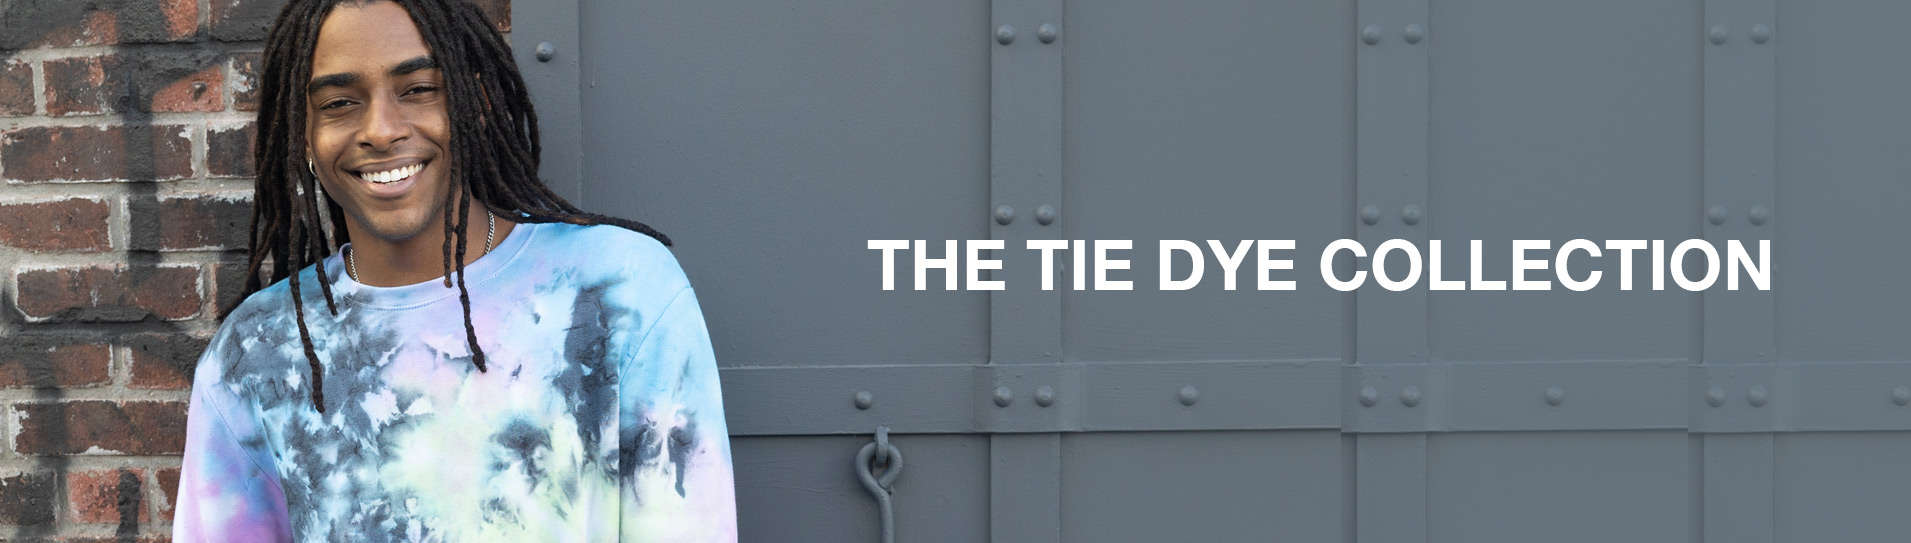 Tie Dye Collection Banner